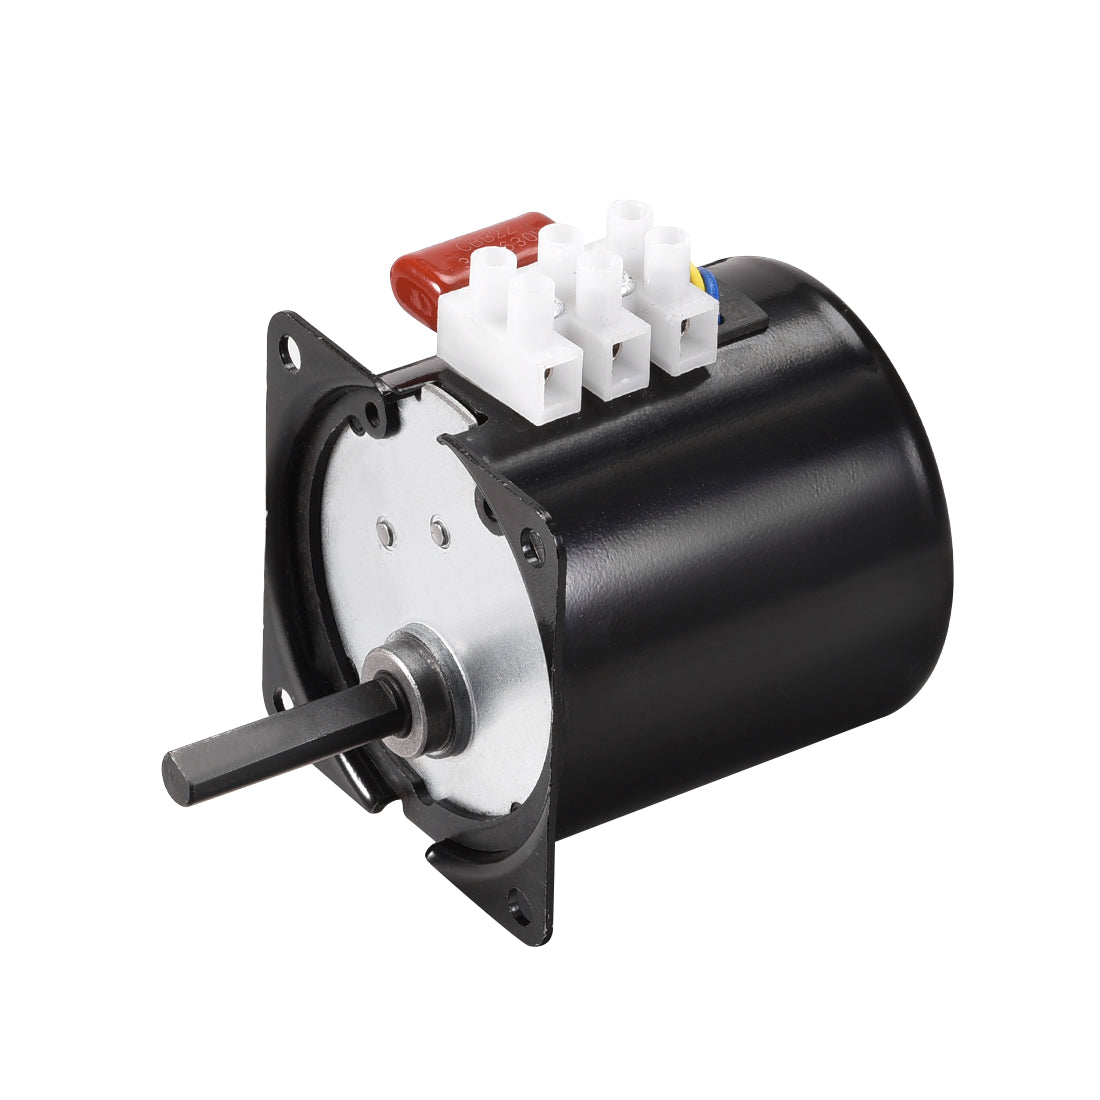 uxcell Uxcell AC 110V Synchronous Motor Metal Gear CW/CCW 2.5RPM 14W 7mm Dia Eccentric Shaft